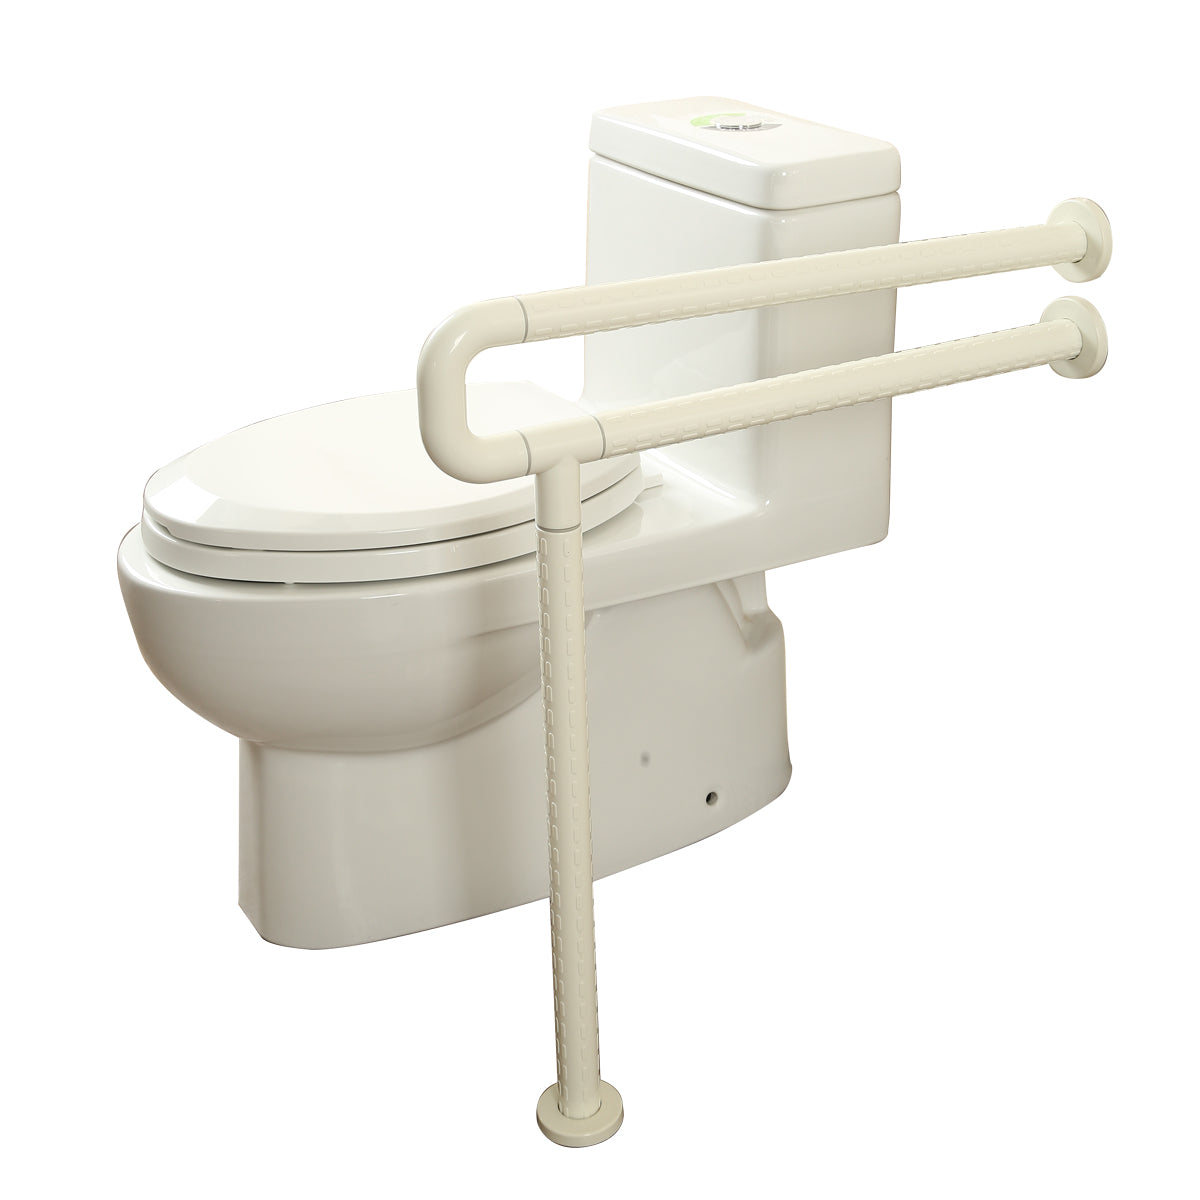 C Shaped Grab Bar With Floor Support